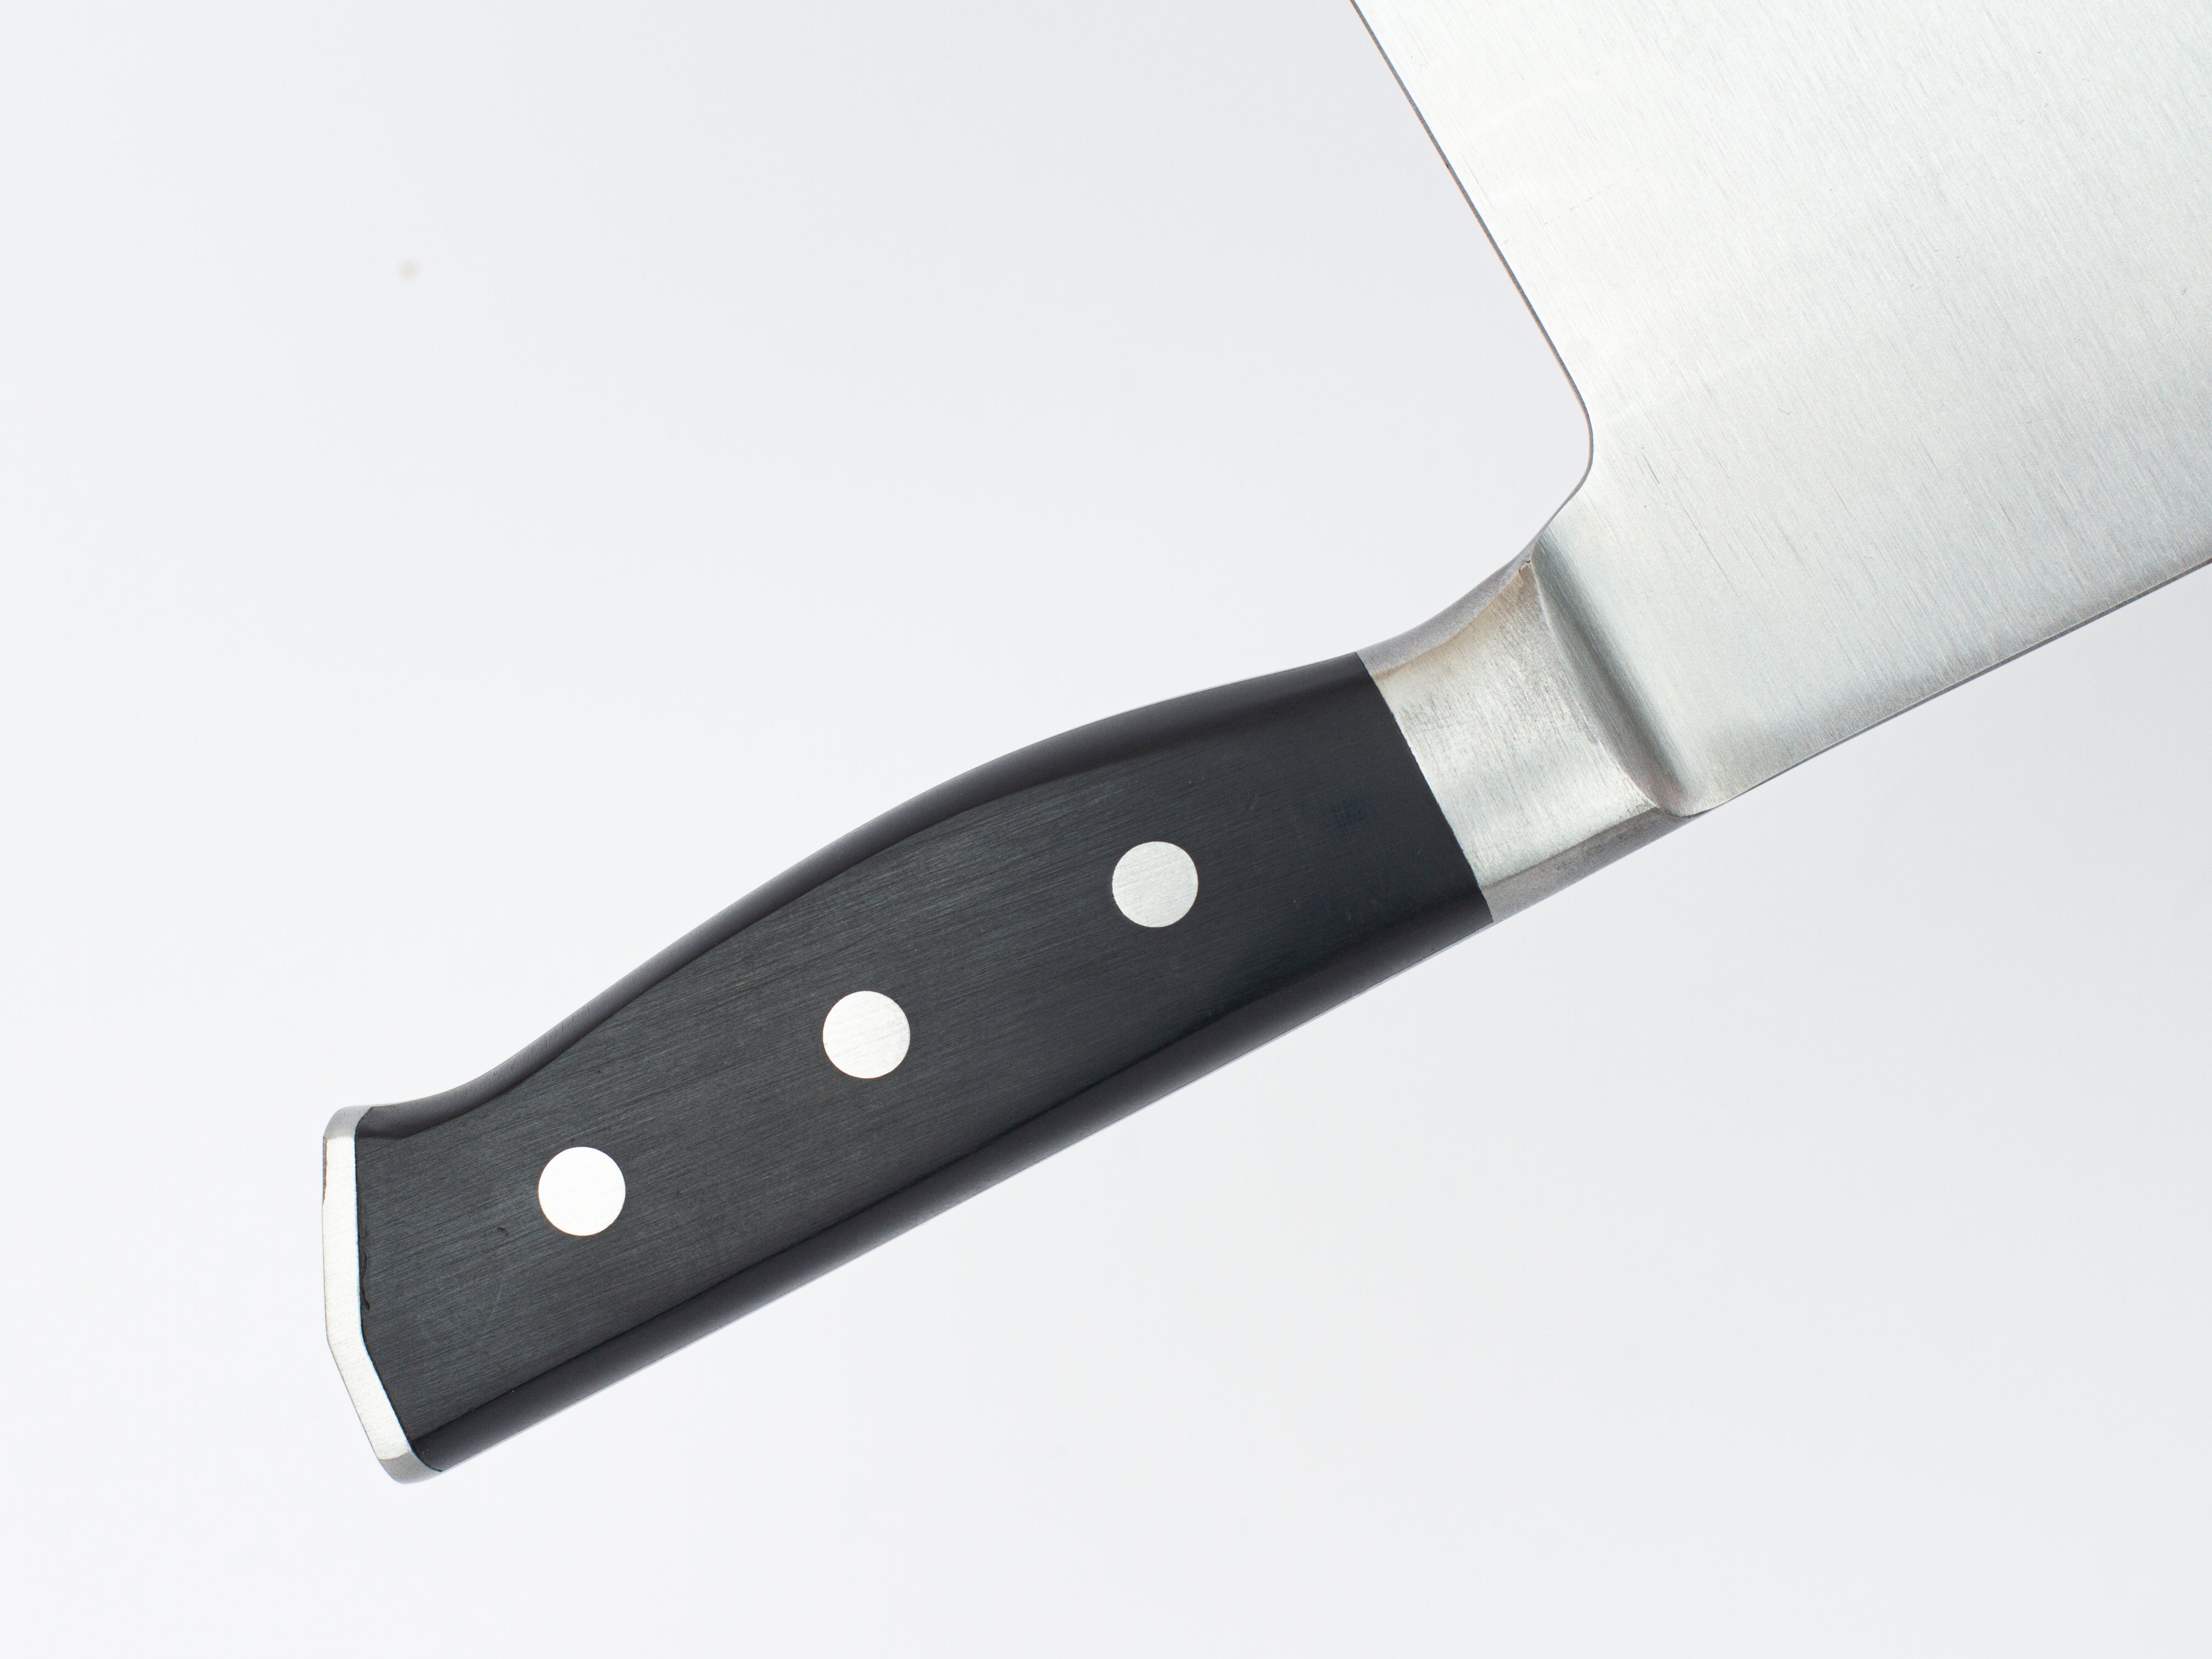 Chinese Best Kitchen Knives In The World For Butchers Cleaver - Buy Chinese Best  Kitchen Knives In The World For Butchers Cleaver Product on